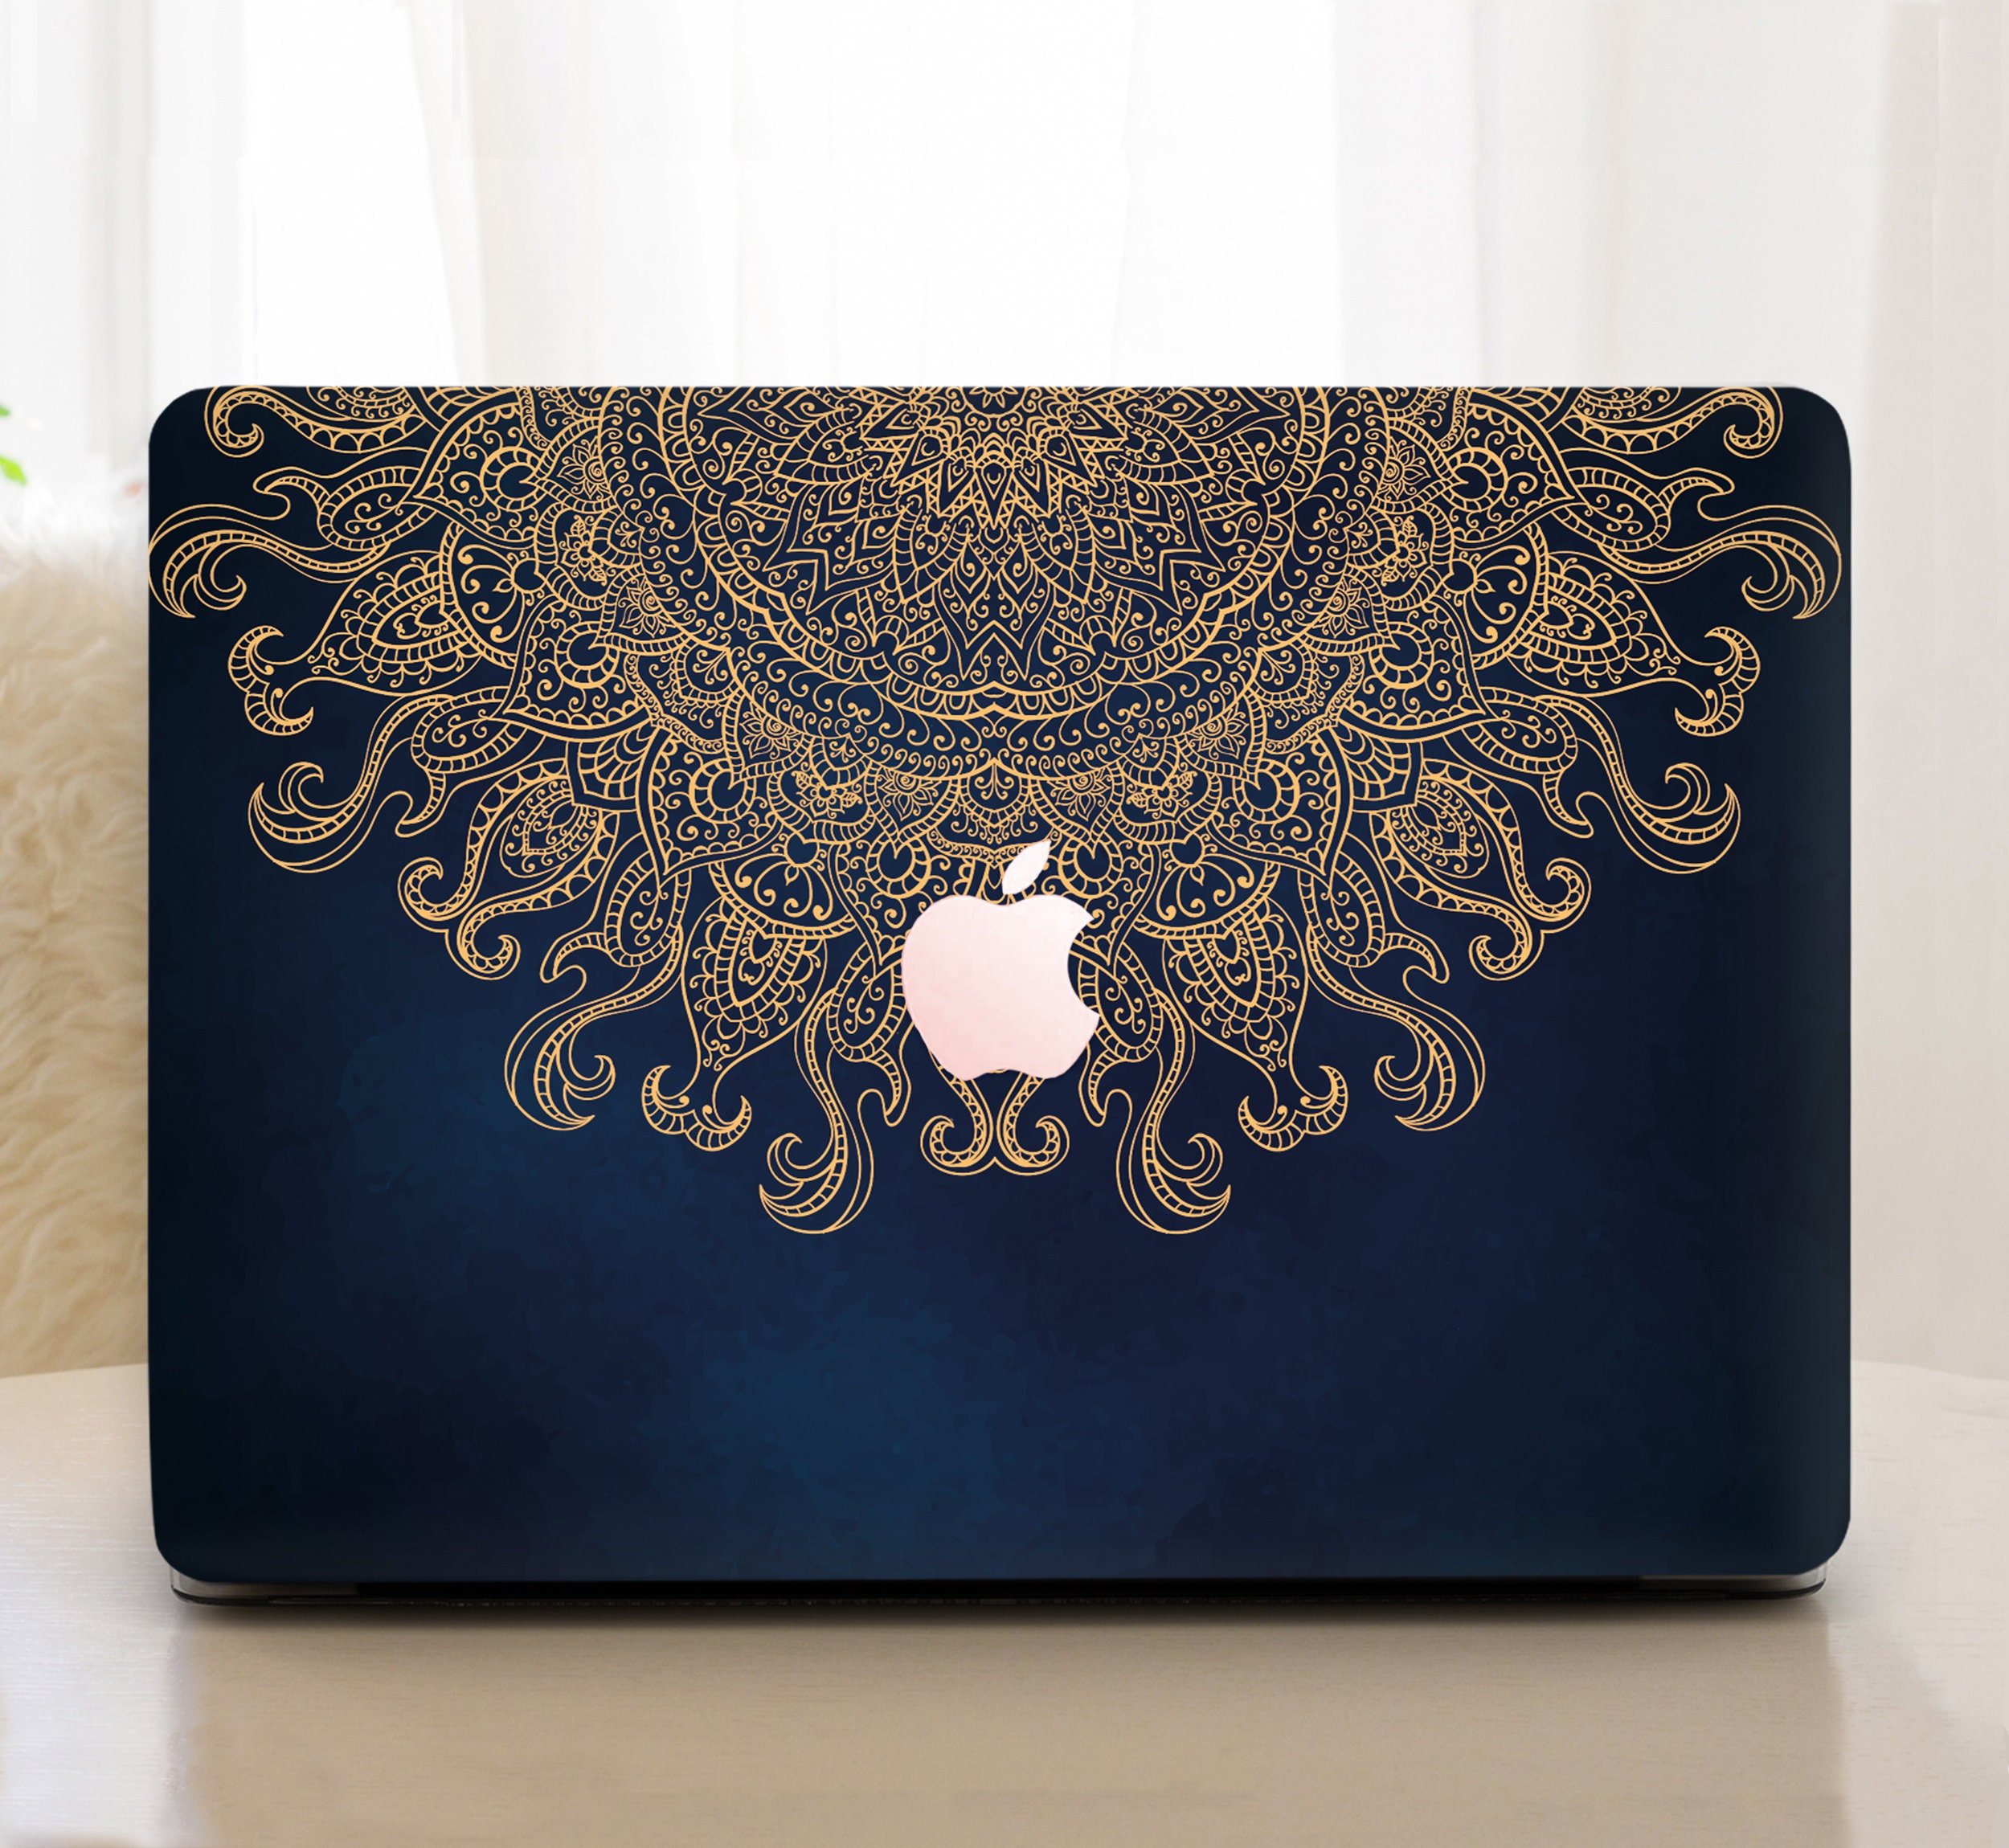 Abstract Floral Colorful MacBook Skin / Decal